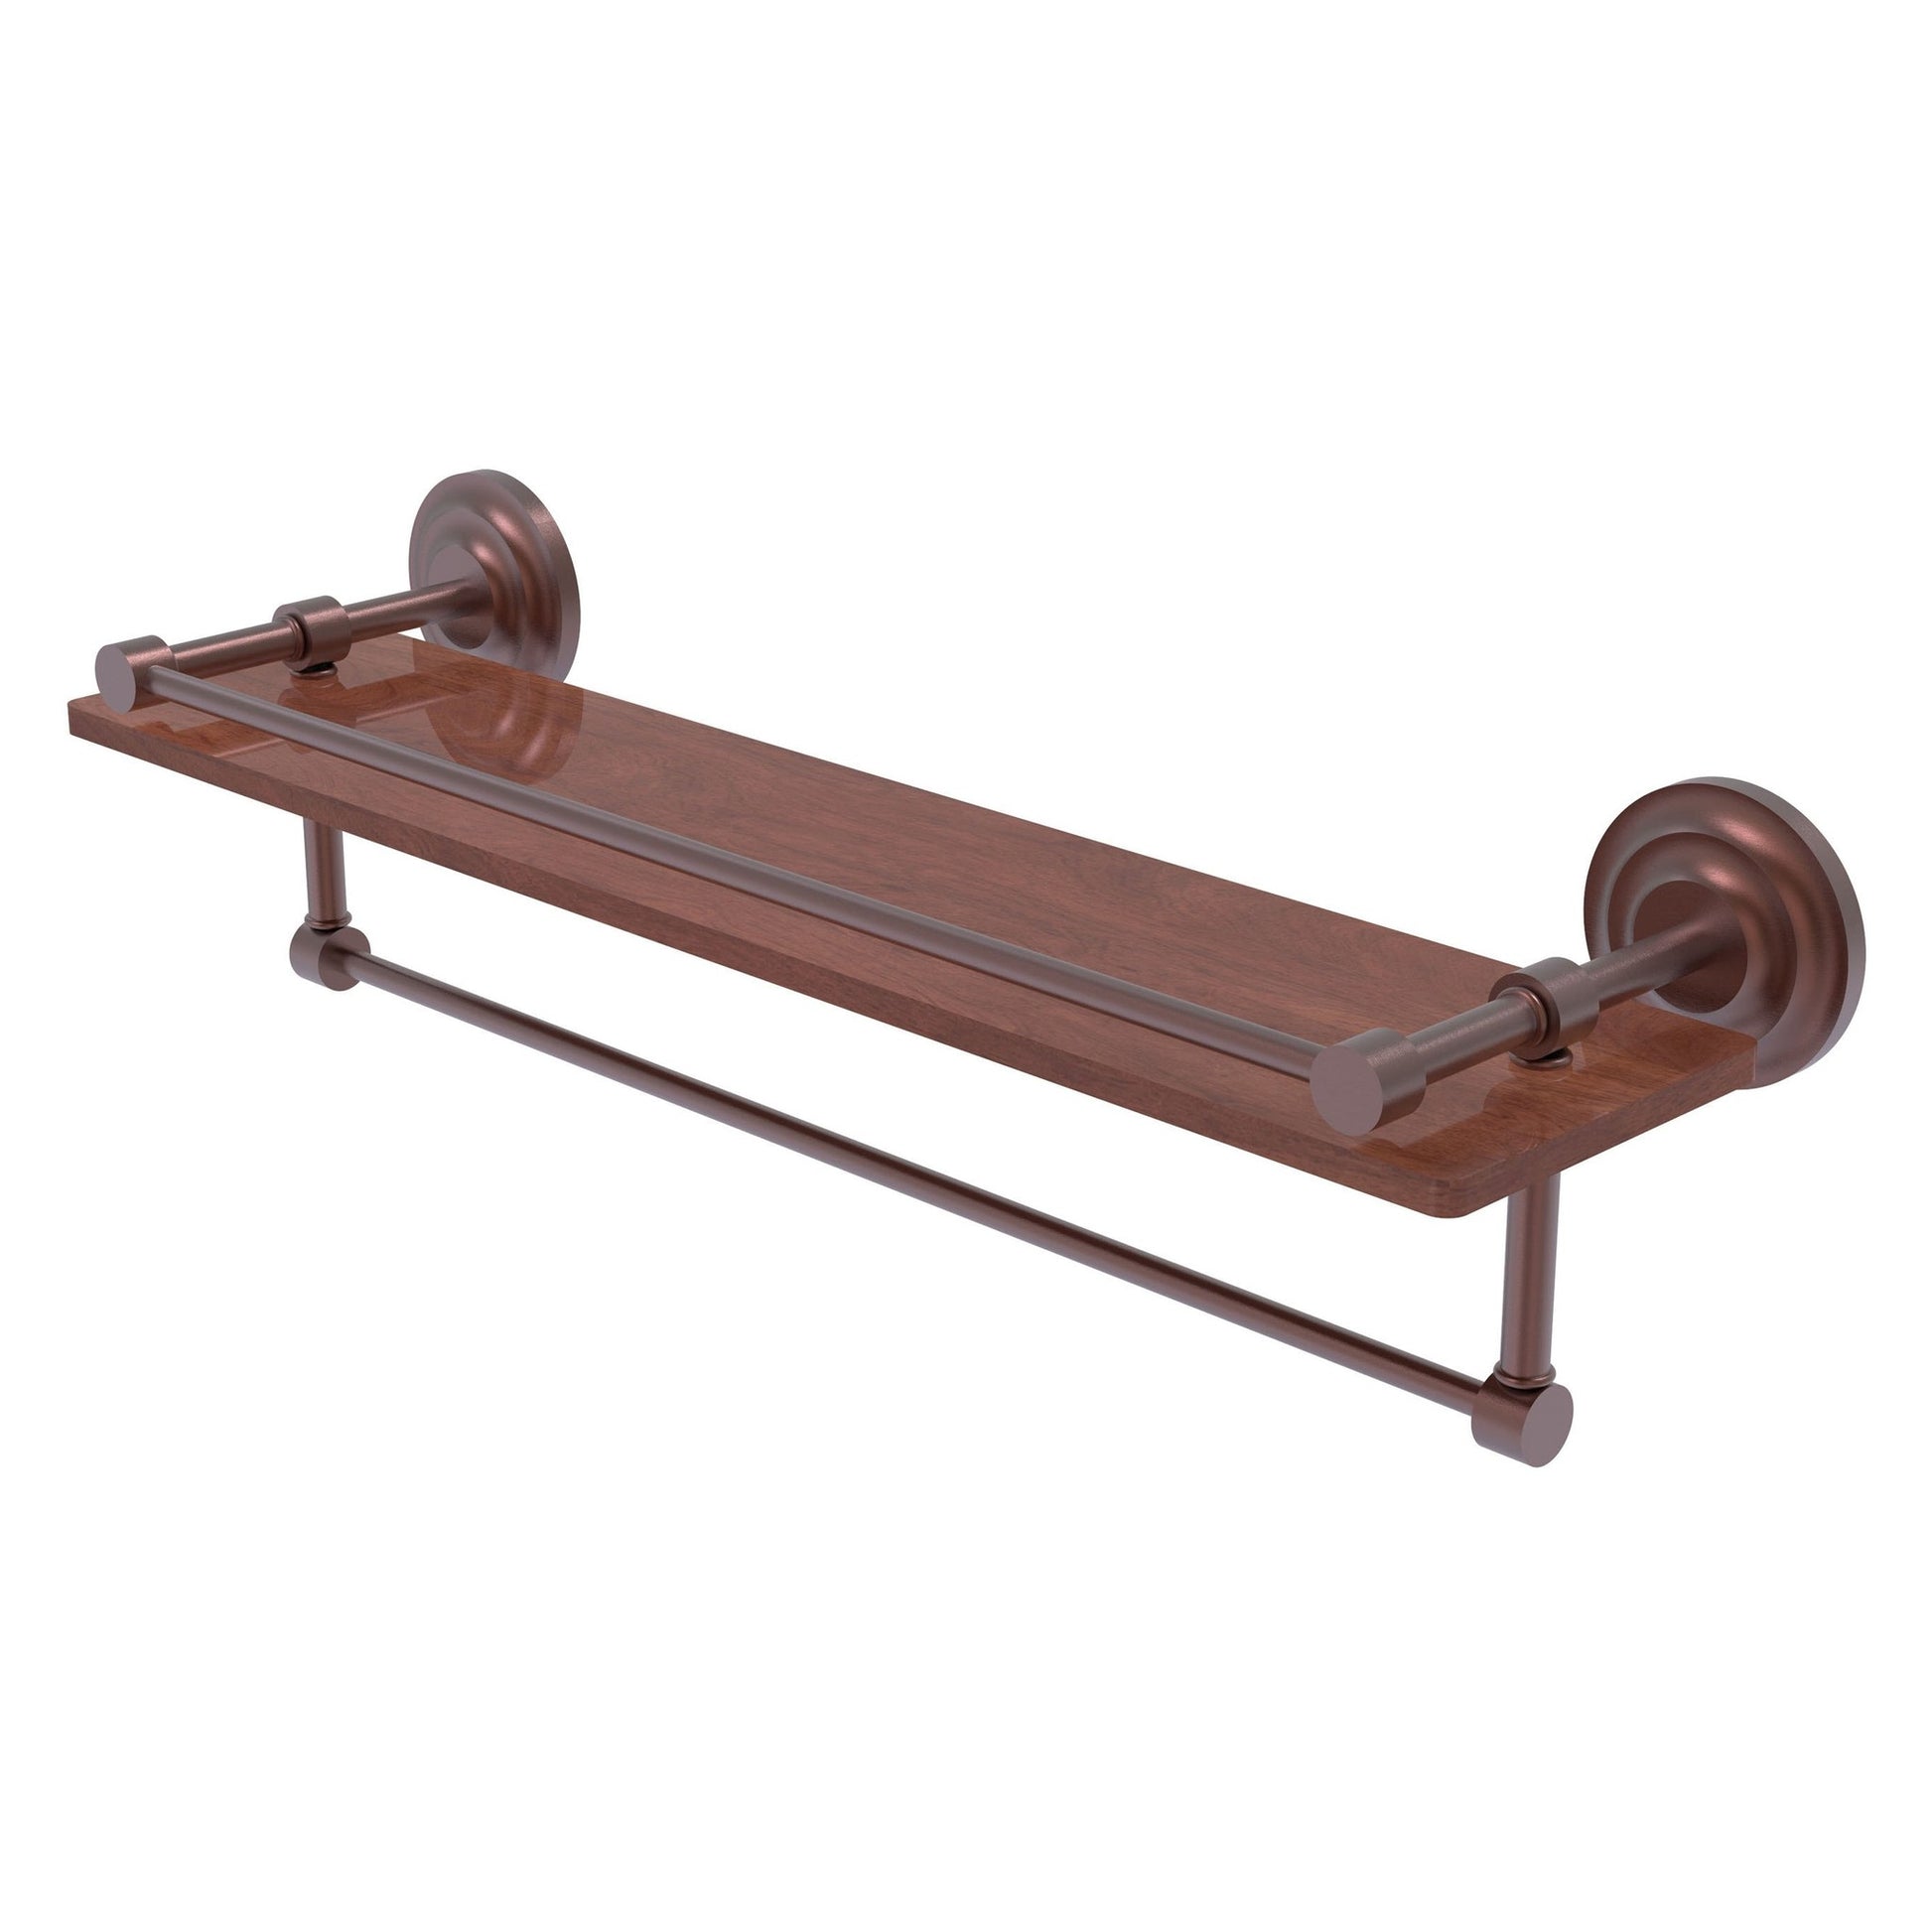 Allied Brass Que New 22" x 5" Antique Copper Solid Brass 22-Inch IPE Ironwood Shelf With Gallery Rail and Towel Bar